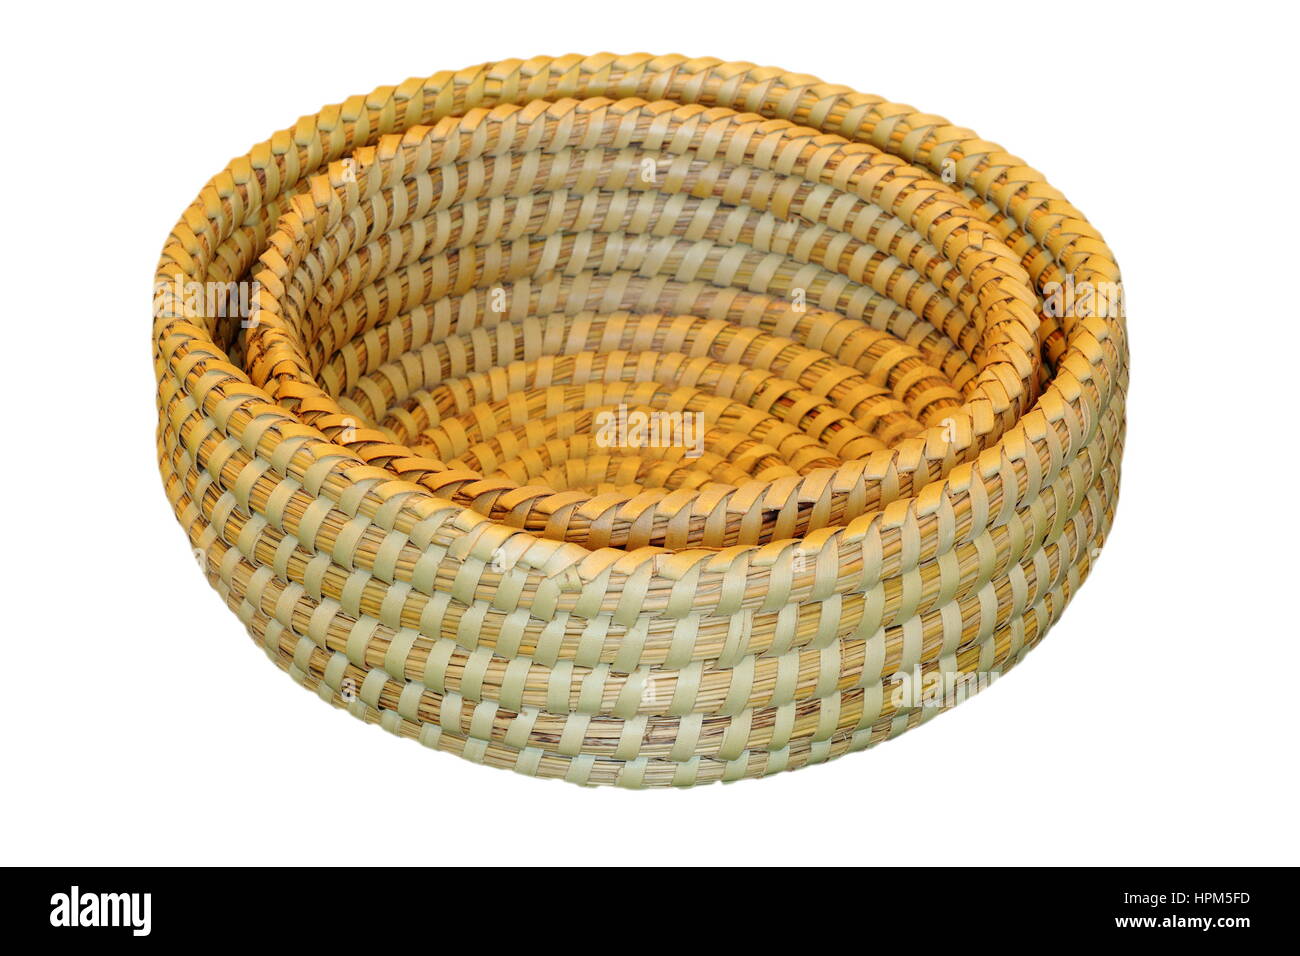 trellis small baskets isolated over white, household objects ready for your design Stock Photo